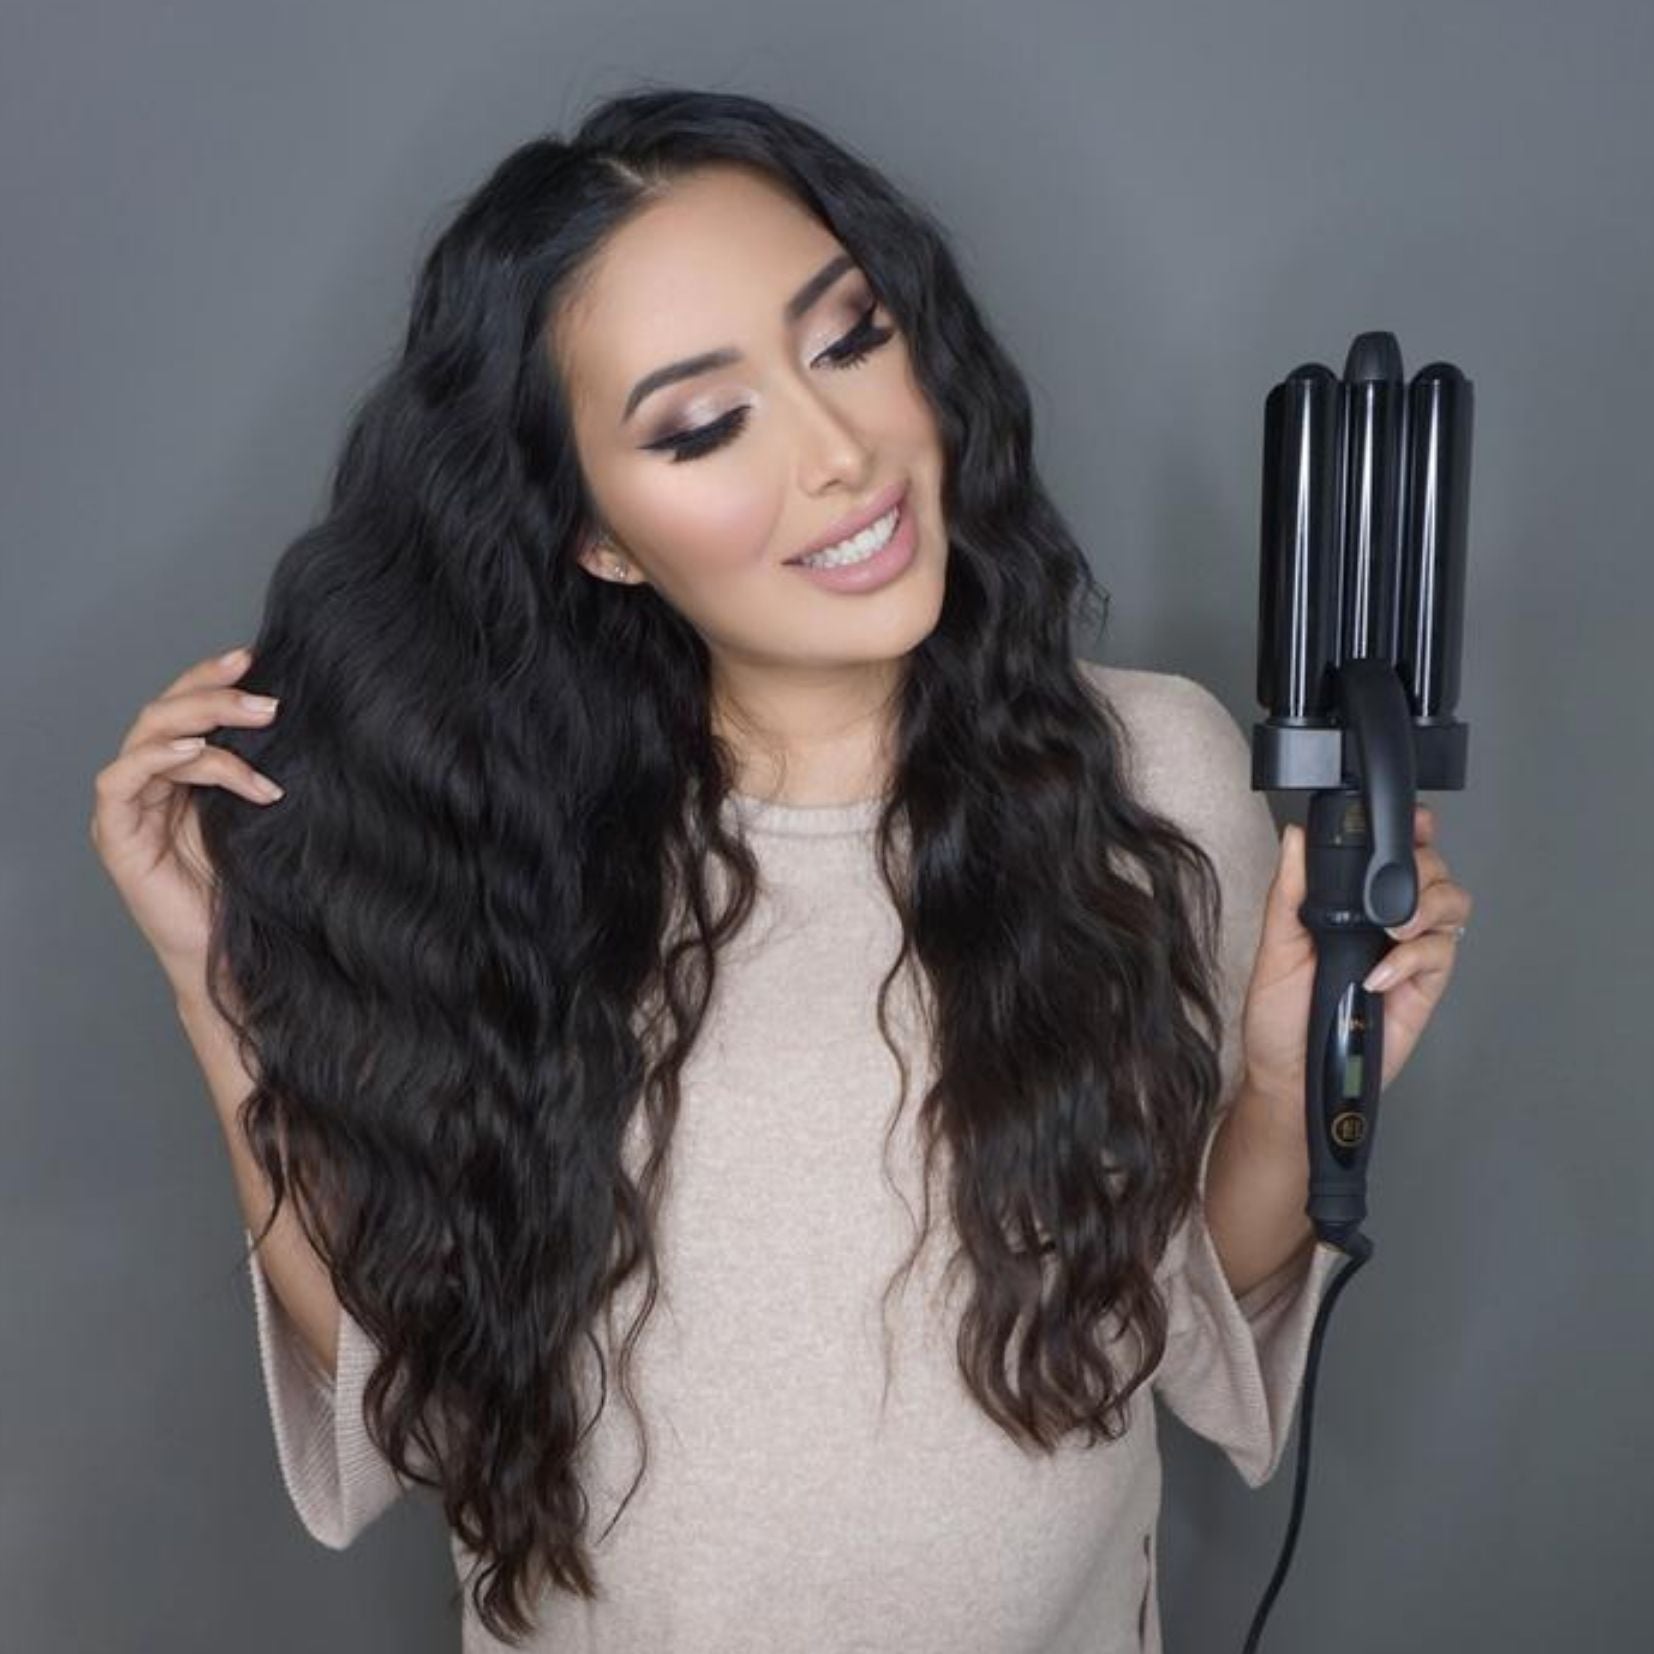 Hairstyling 101: What’s the Right Way to Use Curling Wands?